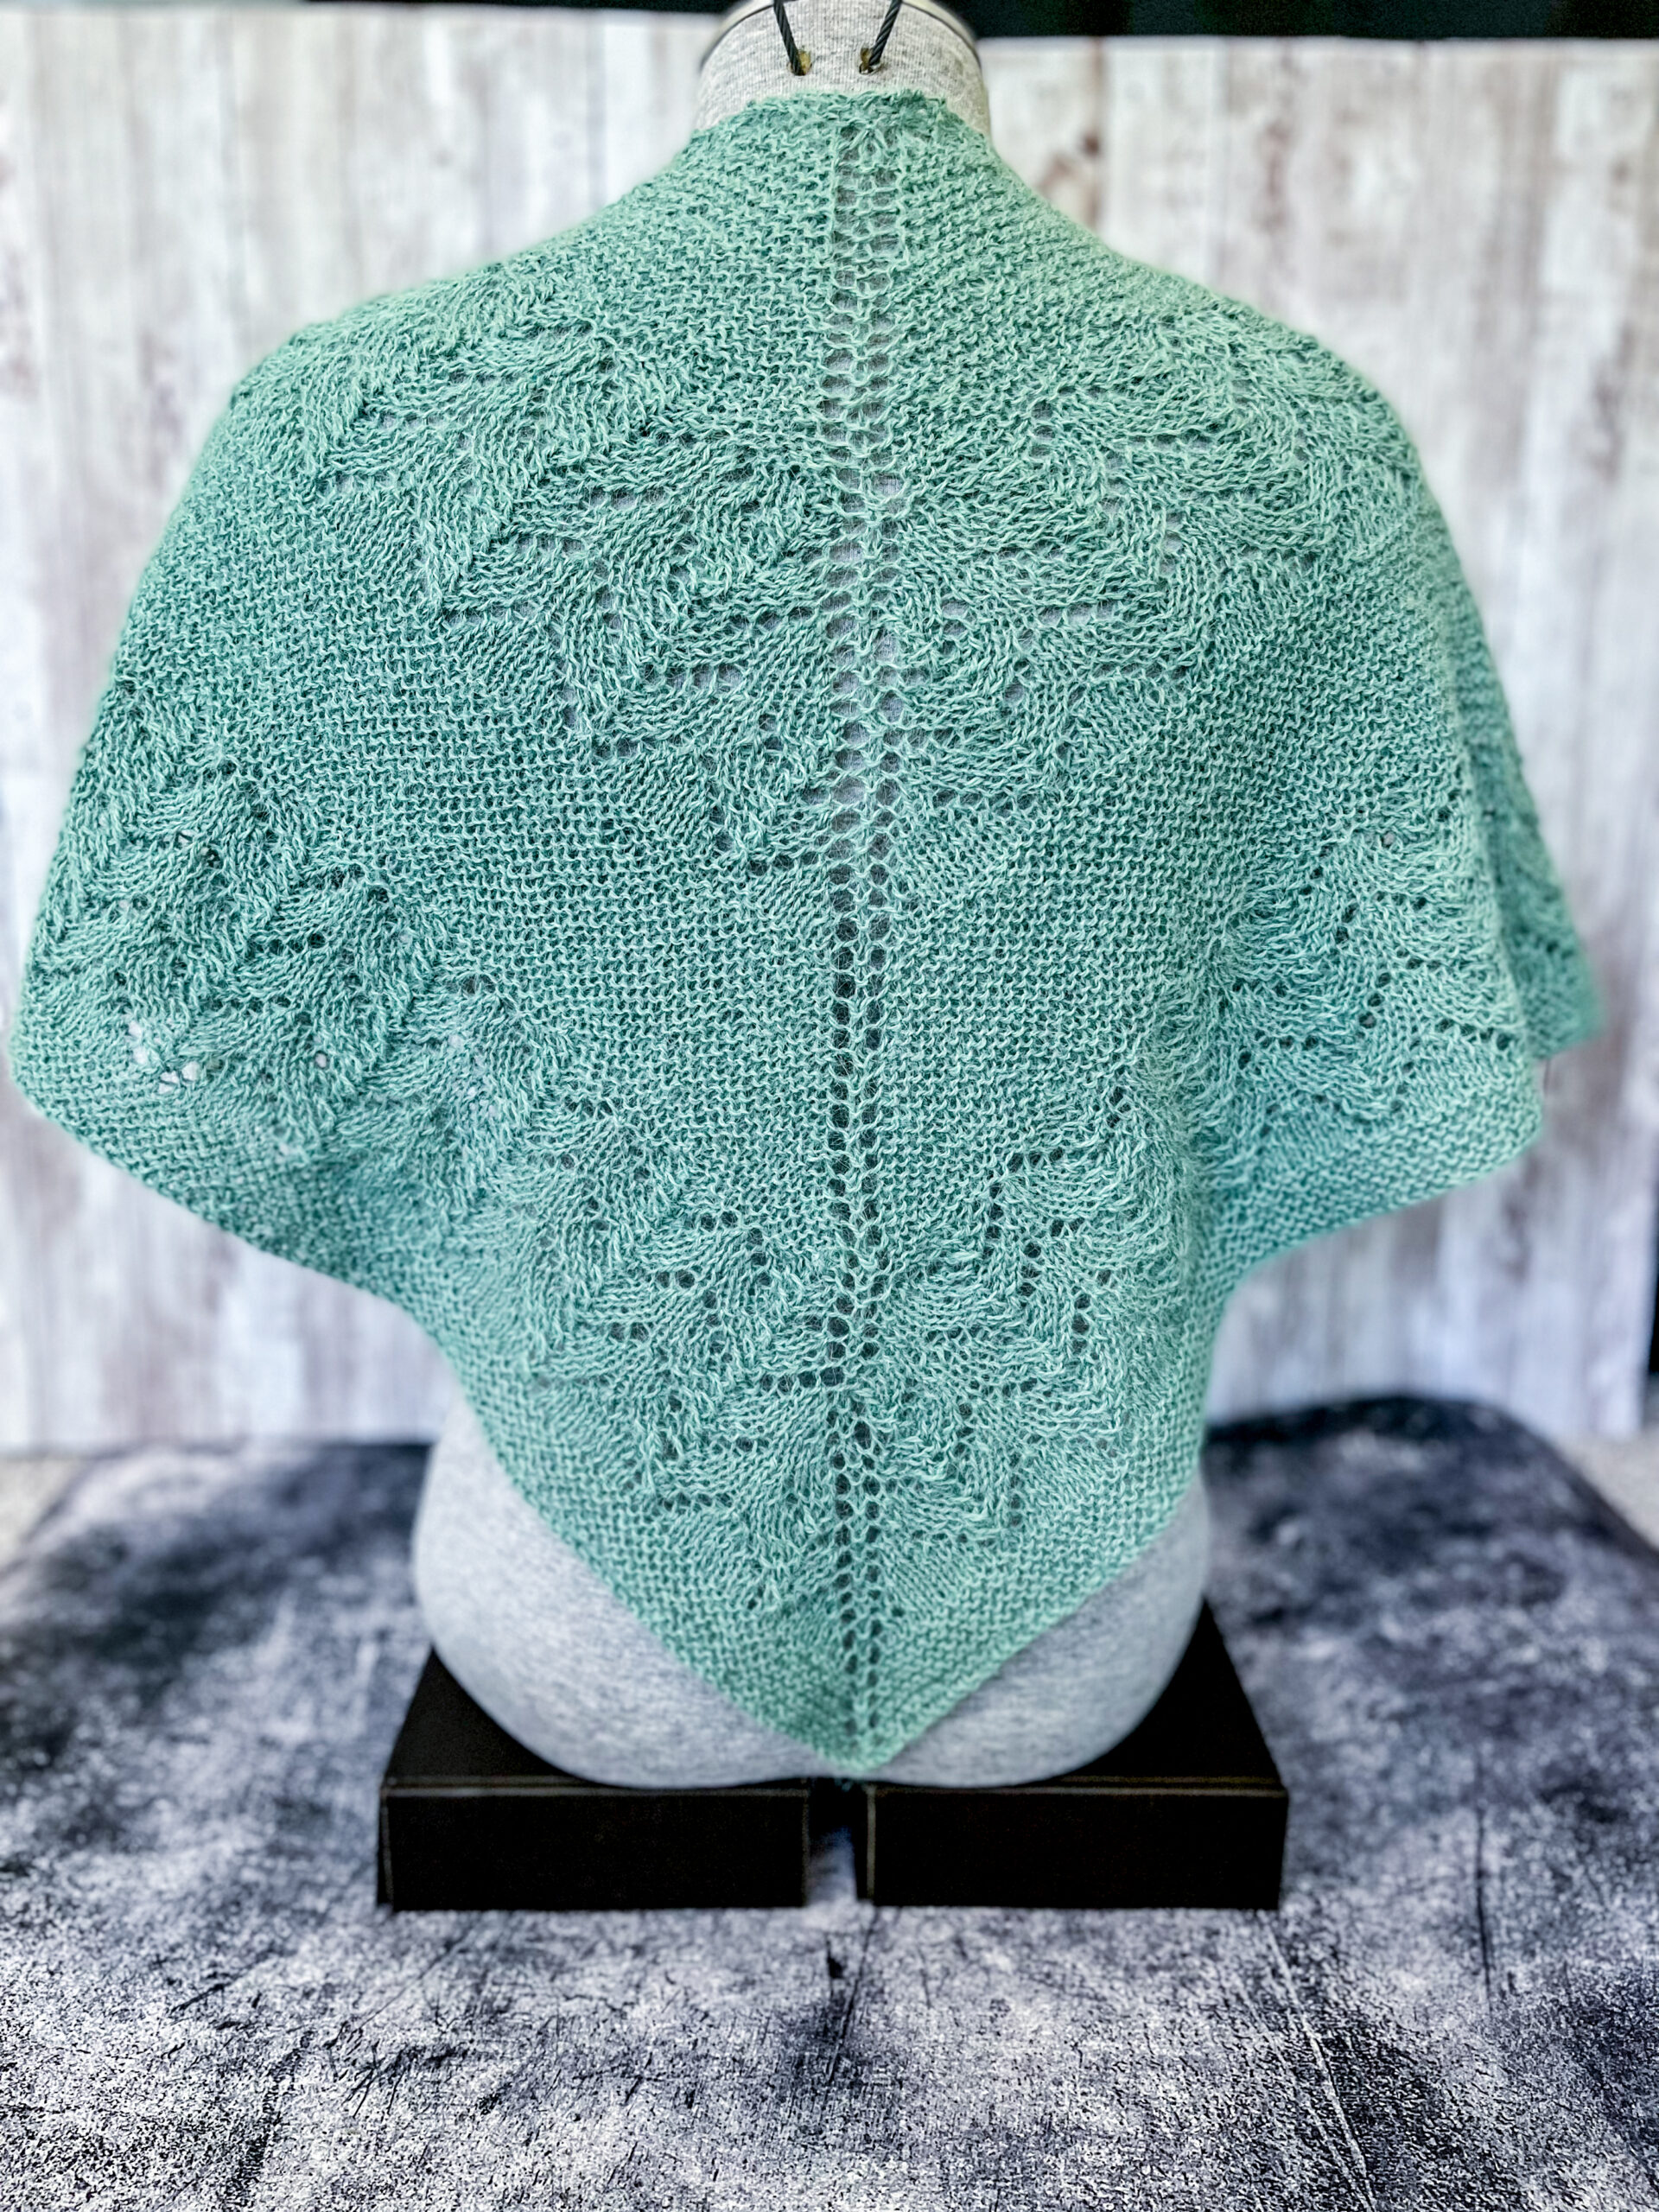 A light eucalyptus green shawl with lace sections alternating with solid sections is shown draped across the back of a mannequin torso.